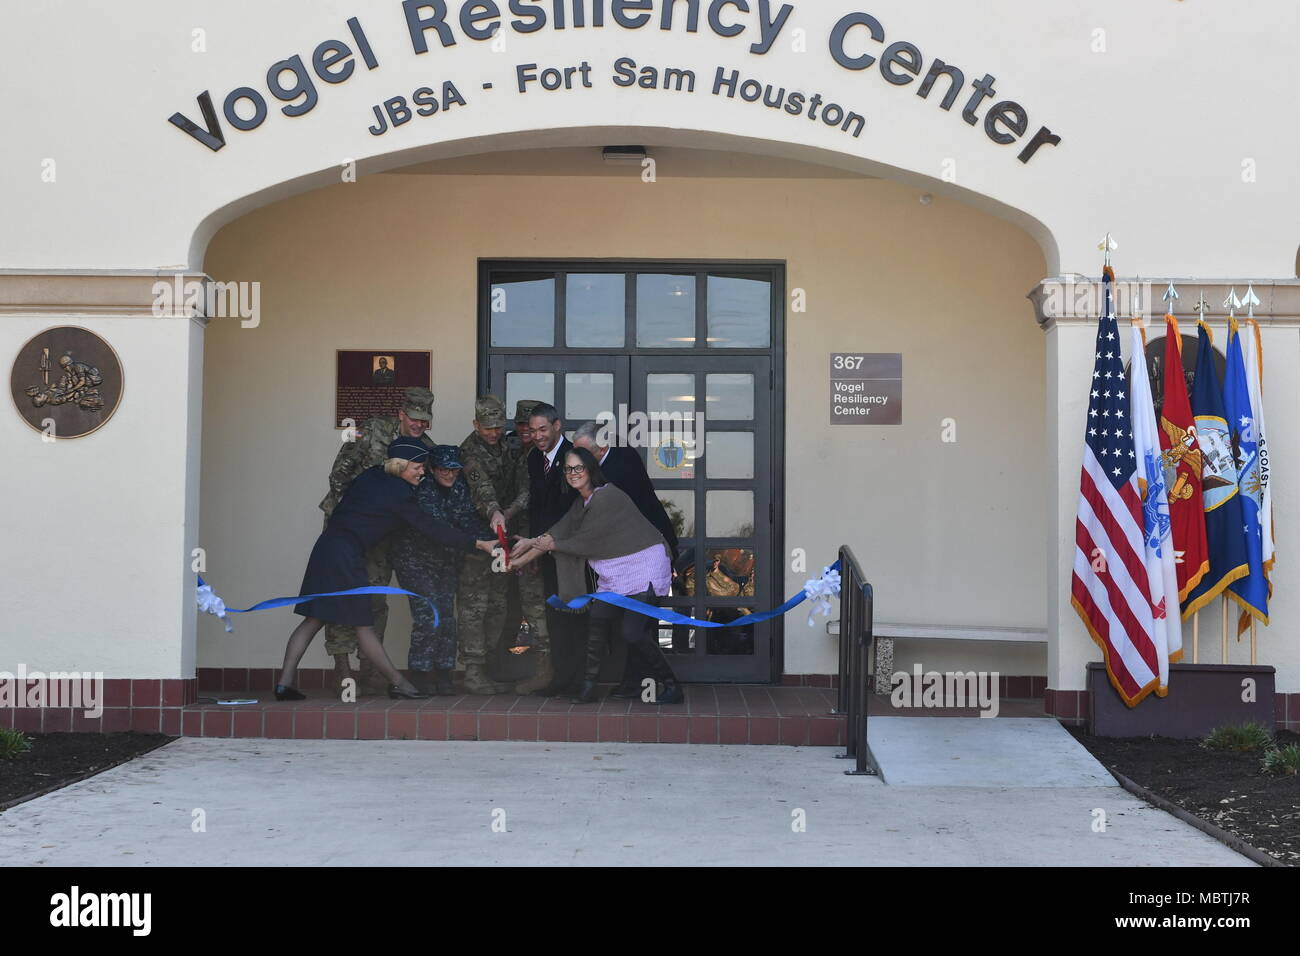 Military, community and family members cut the ribbon to officially open the Vogel Resiliency Center, Friday, January 5. Pictured L-r are Air Force Brig. Gen. Heather Pringle, Army Brig. Gen. Jeffrey Johnson, Rear Admiral Rebecca McCormick-Boyle, Army Lt. Gen. Jeffrey S. Buchanan, Army Lt. Gen. Nadja West, San Antonio Mayor Ron Nirenberg, Mrs. Sue Orosz, and Acting Asst. of the Army for Manpower and Reserve Affairs Raymond Horoho. The Vogel Resiliency Center brings together eight entities of resiliency services to one location. This facility is unique to Fort Sam Houston and unique in the Army Stock Photo